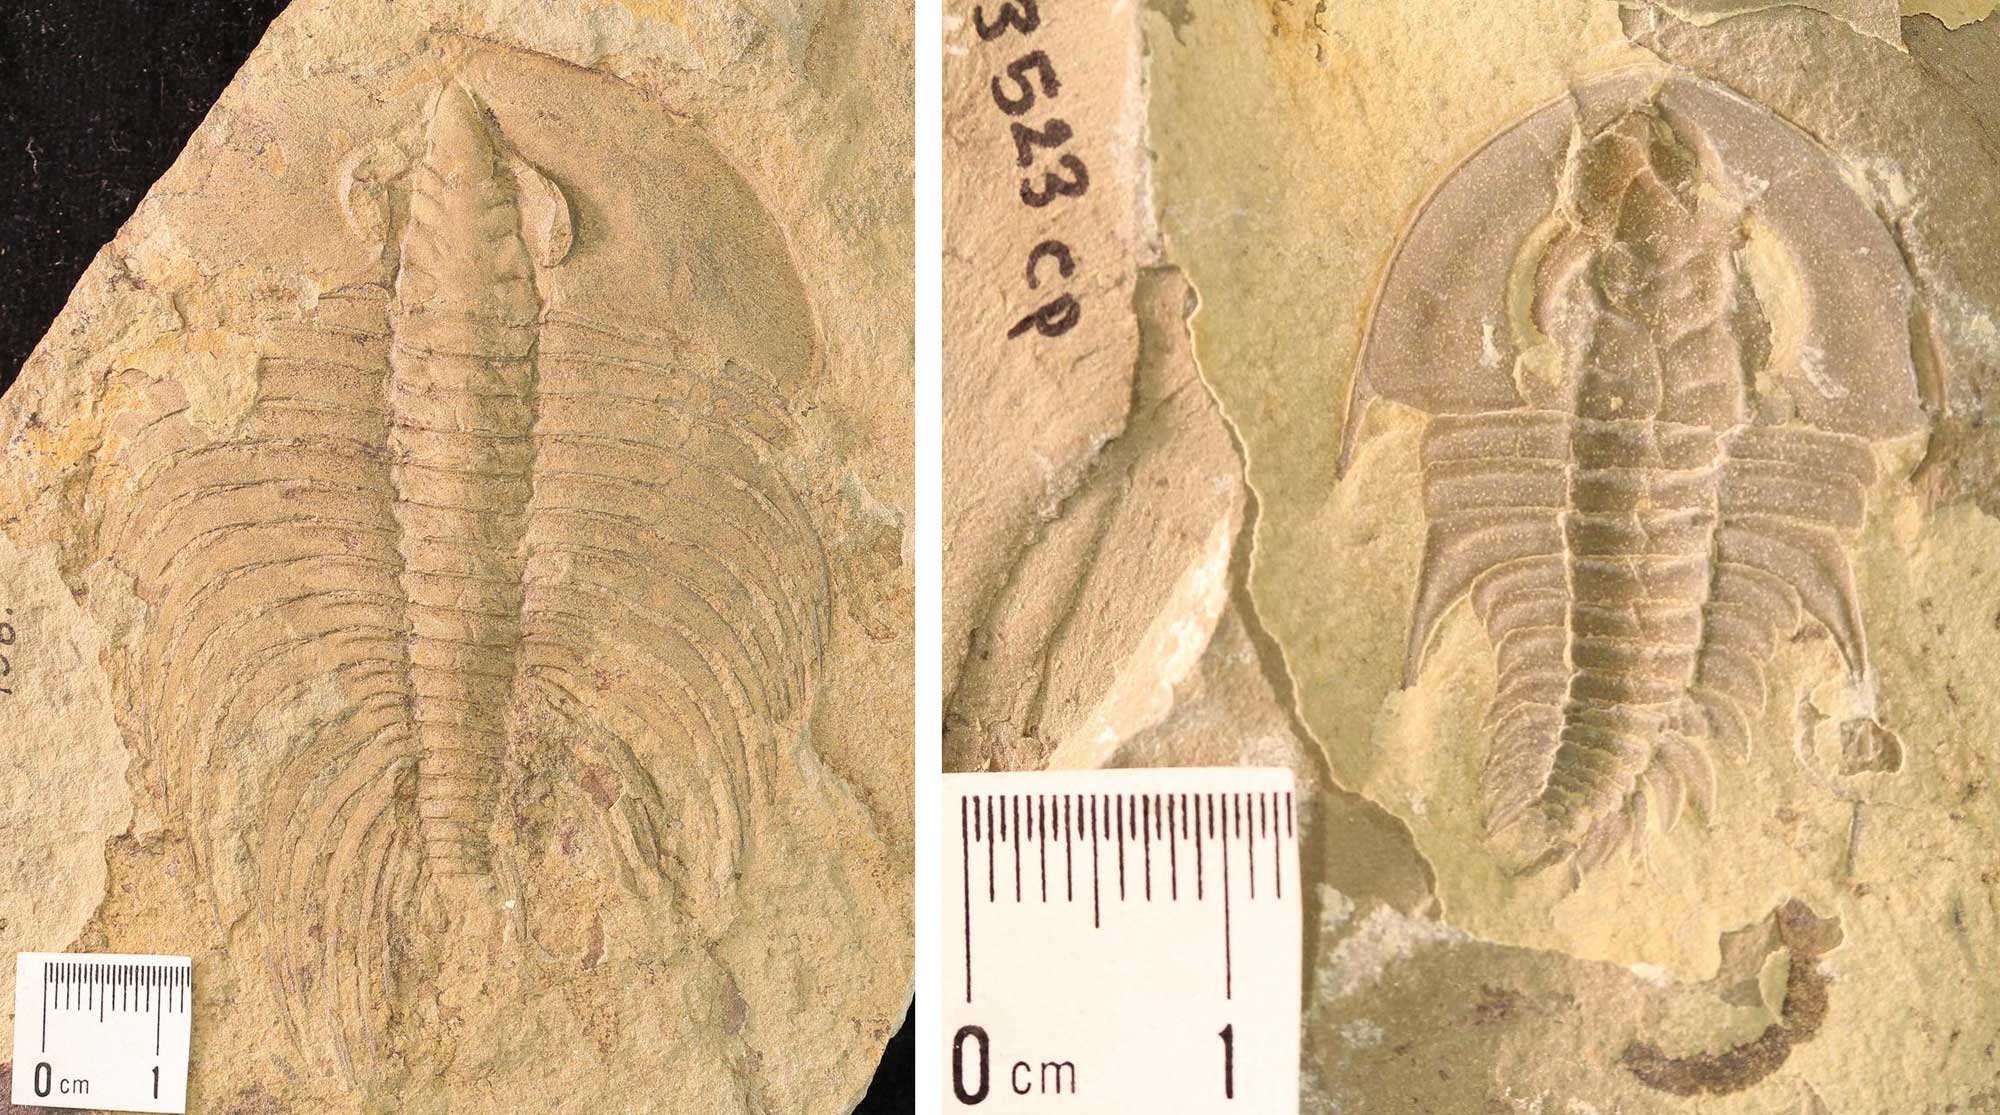 2-panel image of Cambrian trilobites from Nevada. Panel 1: A large trilobite with backwards-pointing spines on the sides of its body. Panel 2: A small trilobite (about 2 centimeters long) with a few short backward-pointing spines on the sides of its body.